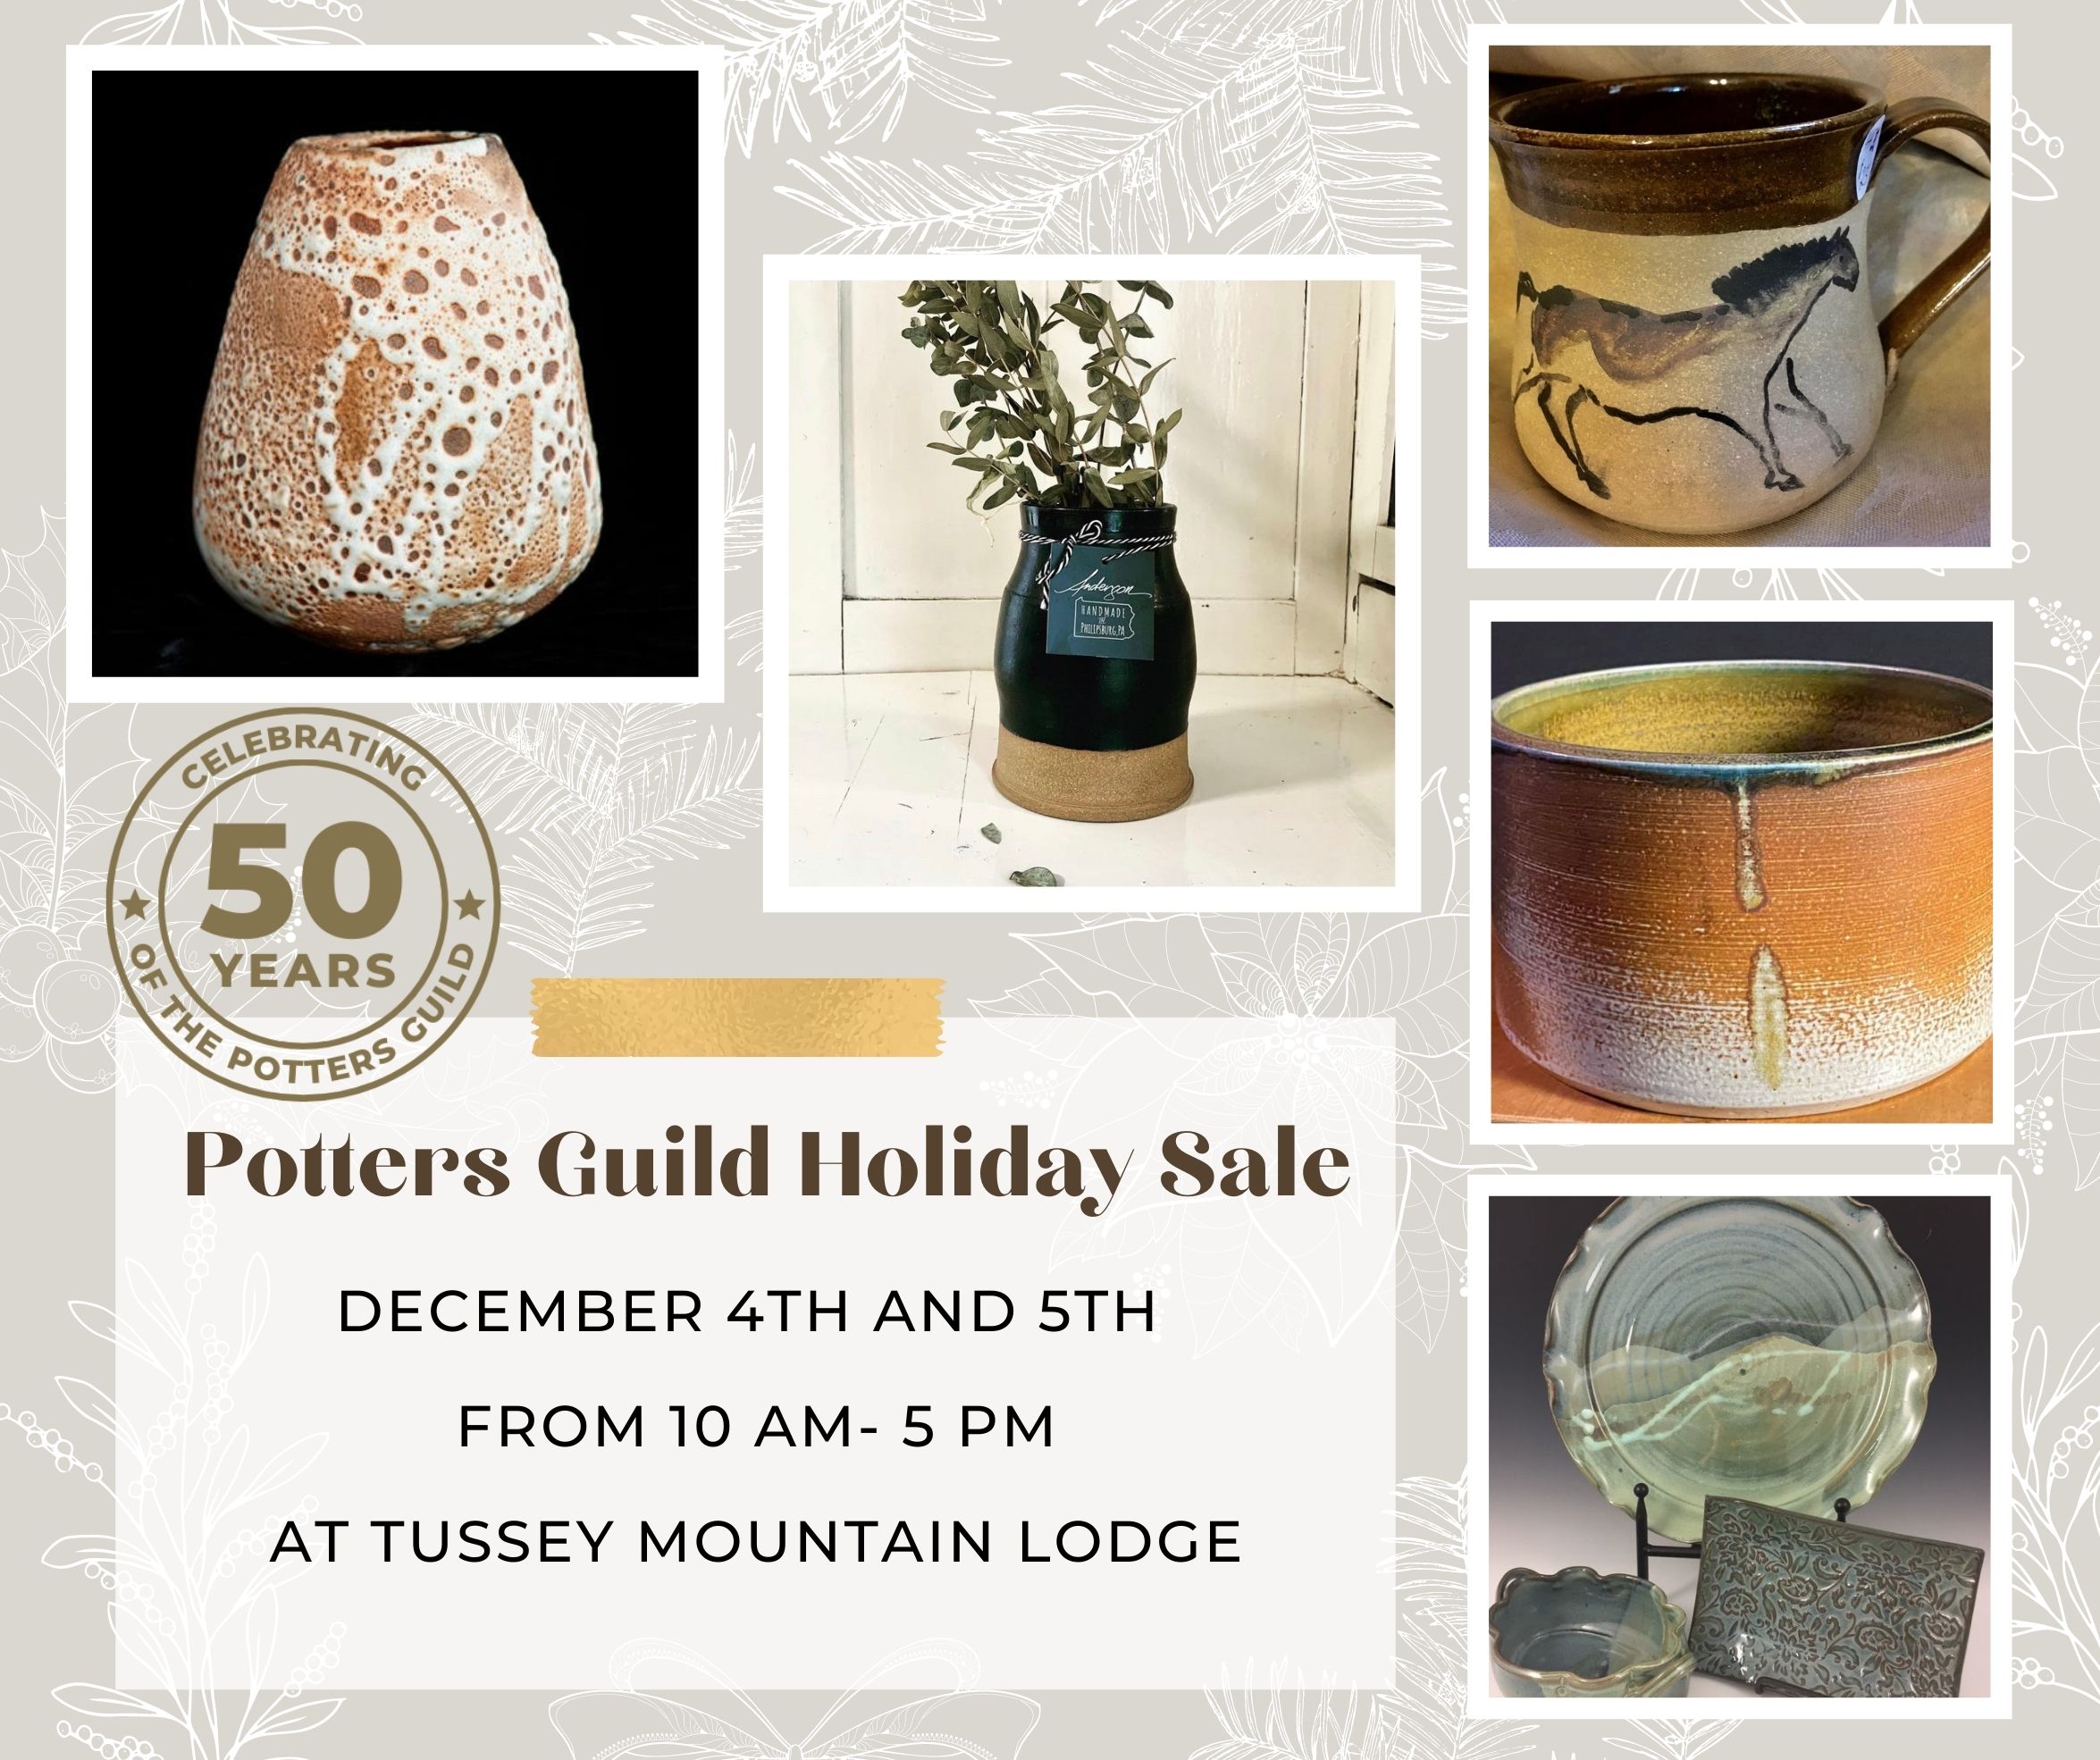 Potters Guild 50th Anniversary Holiday Sale November 9, 2021